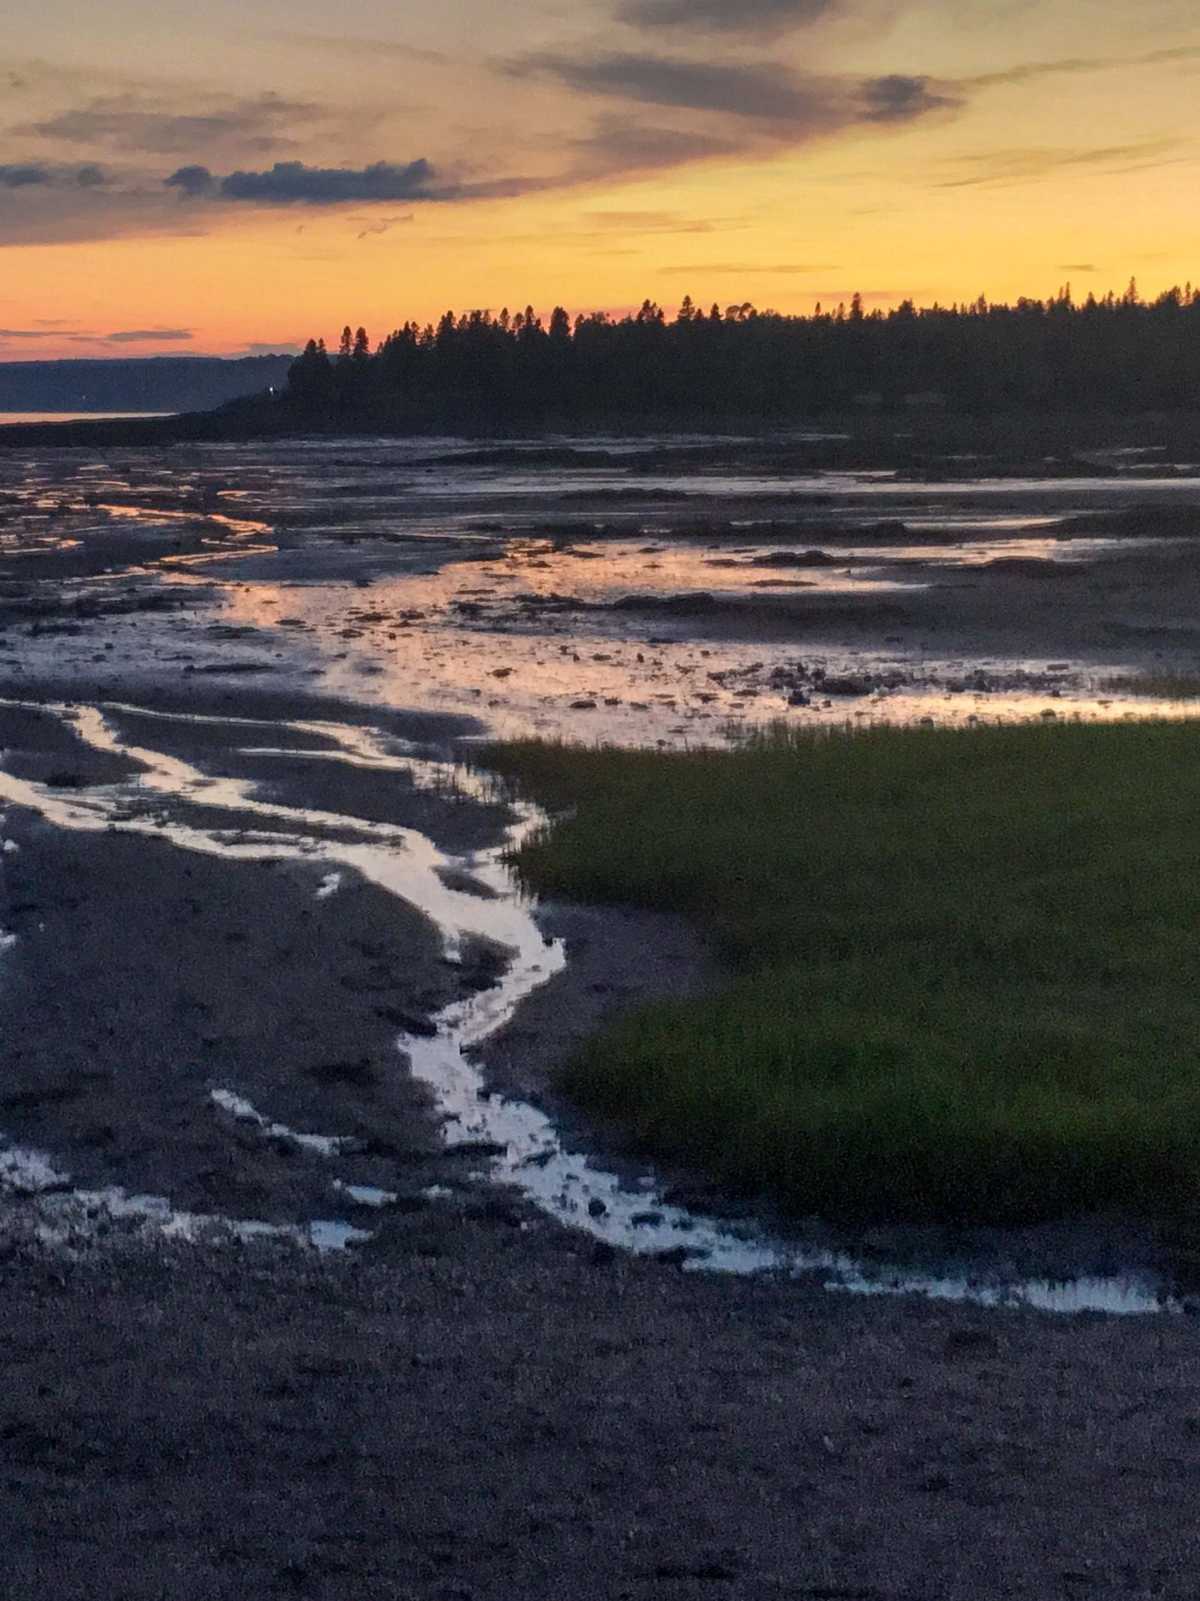 Low tide at St. Andrews, New Brunswick